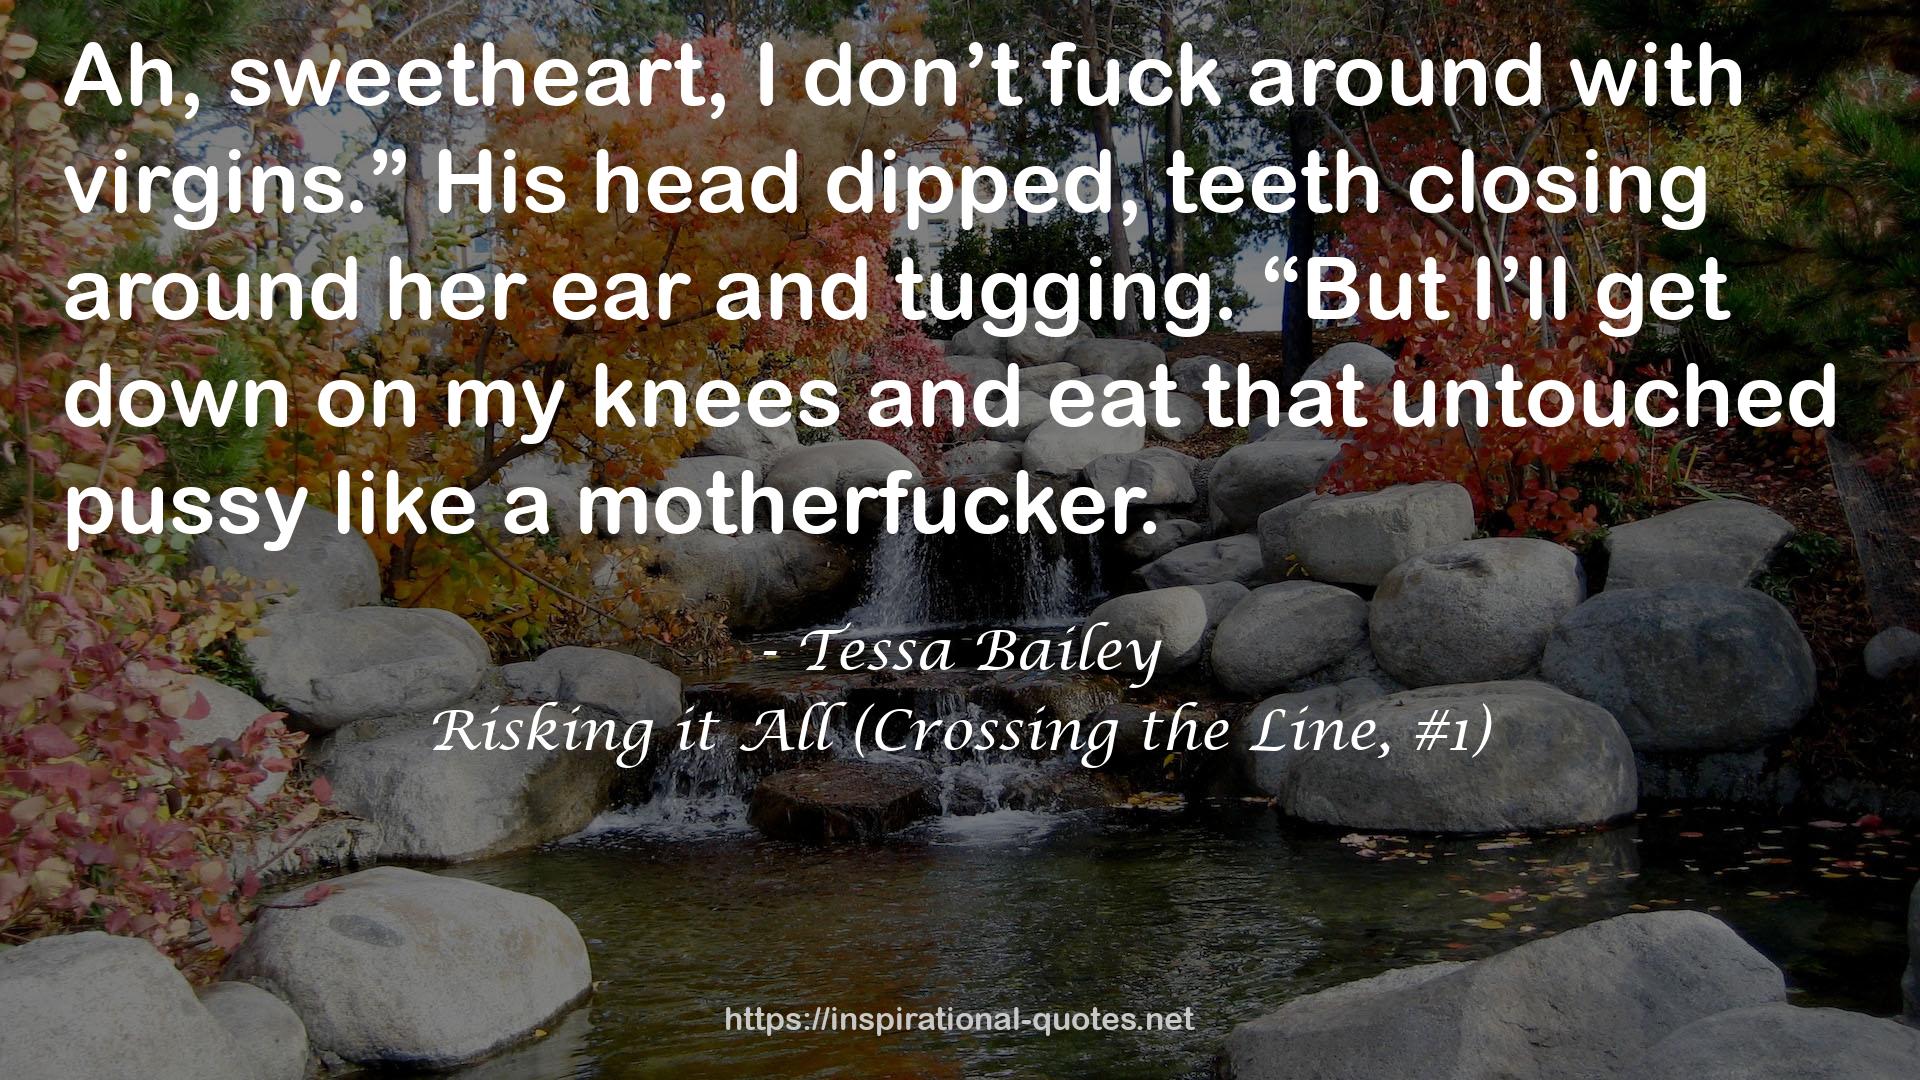 Risking it All (Crossing the Line, #1) QUOTES